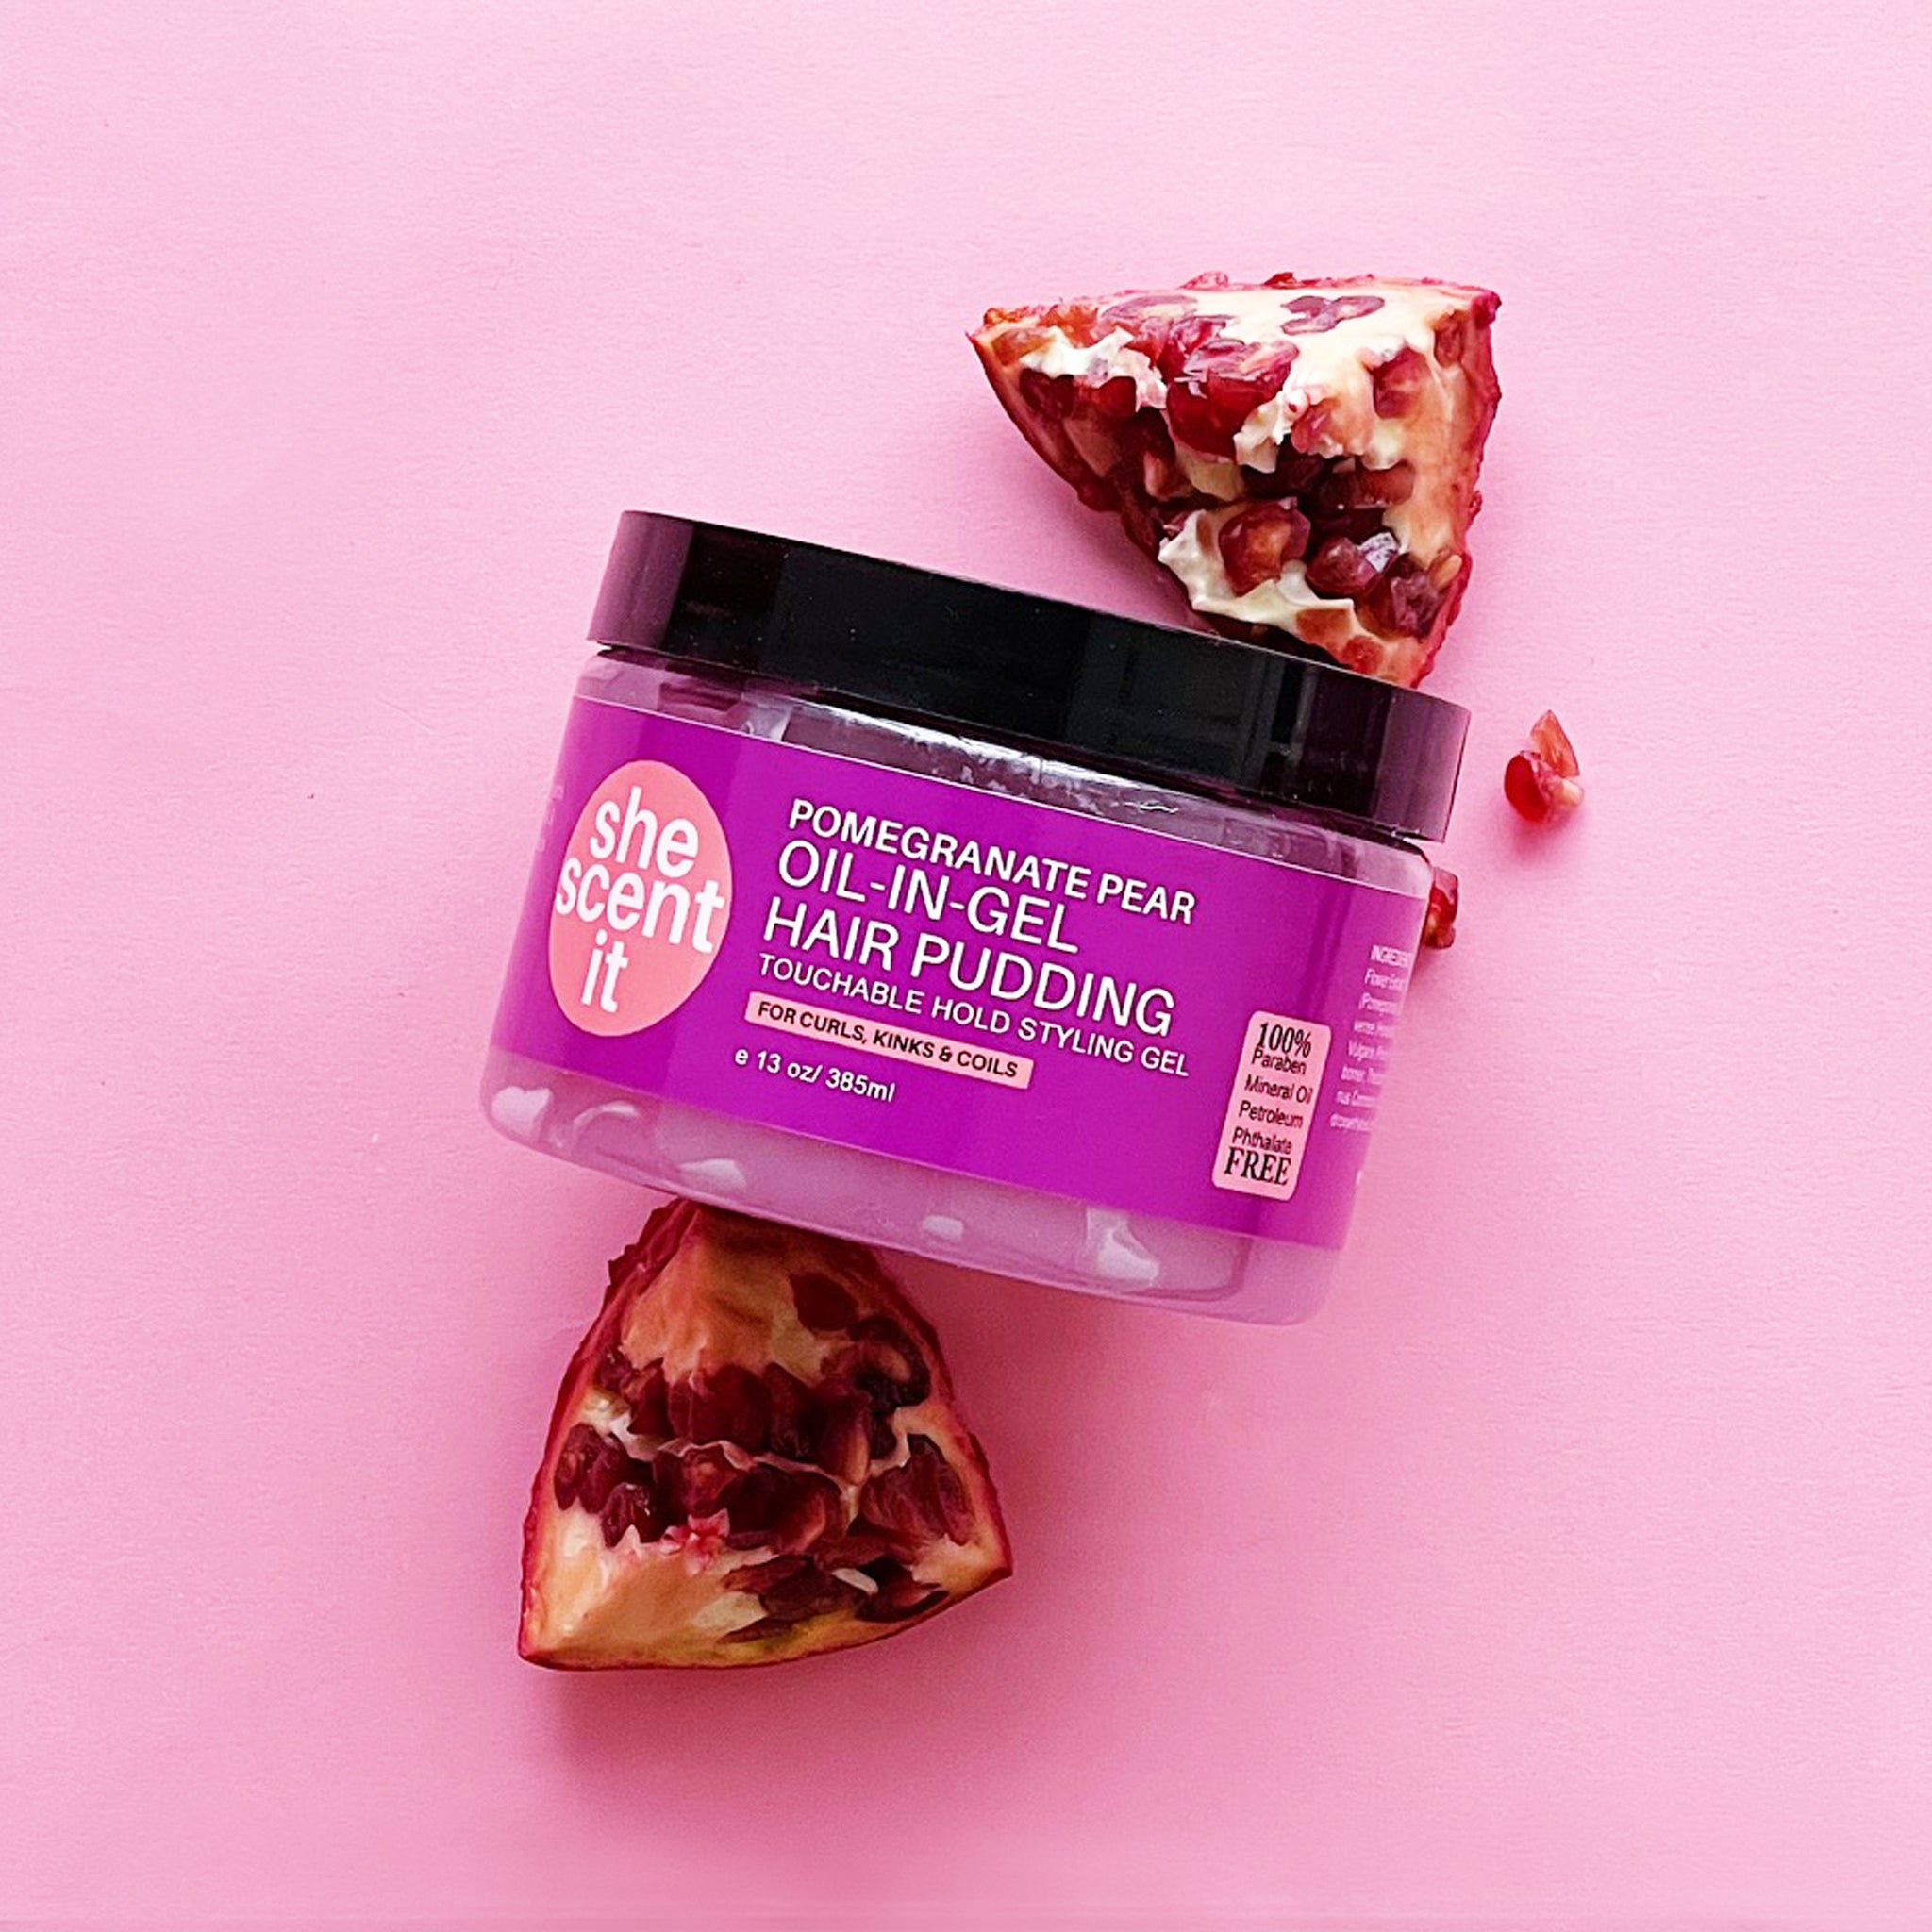 Pomegranate Pear Oil-In-Gel Hair Pudding